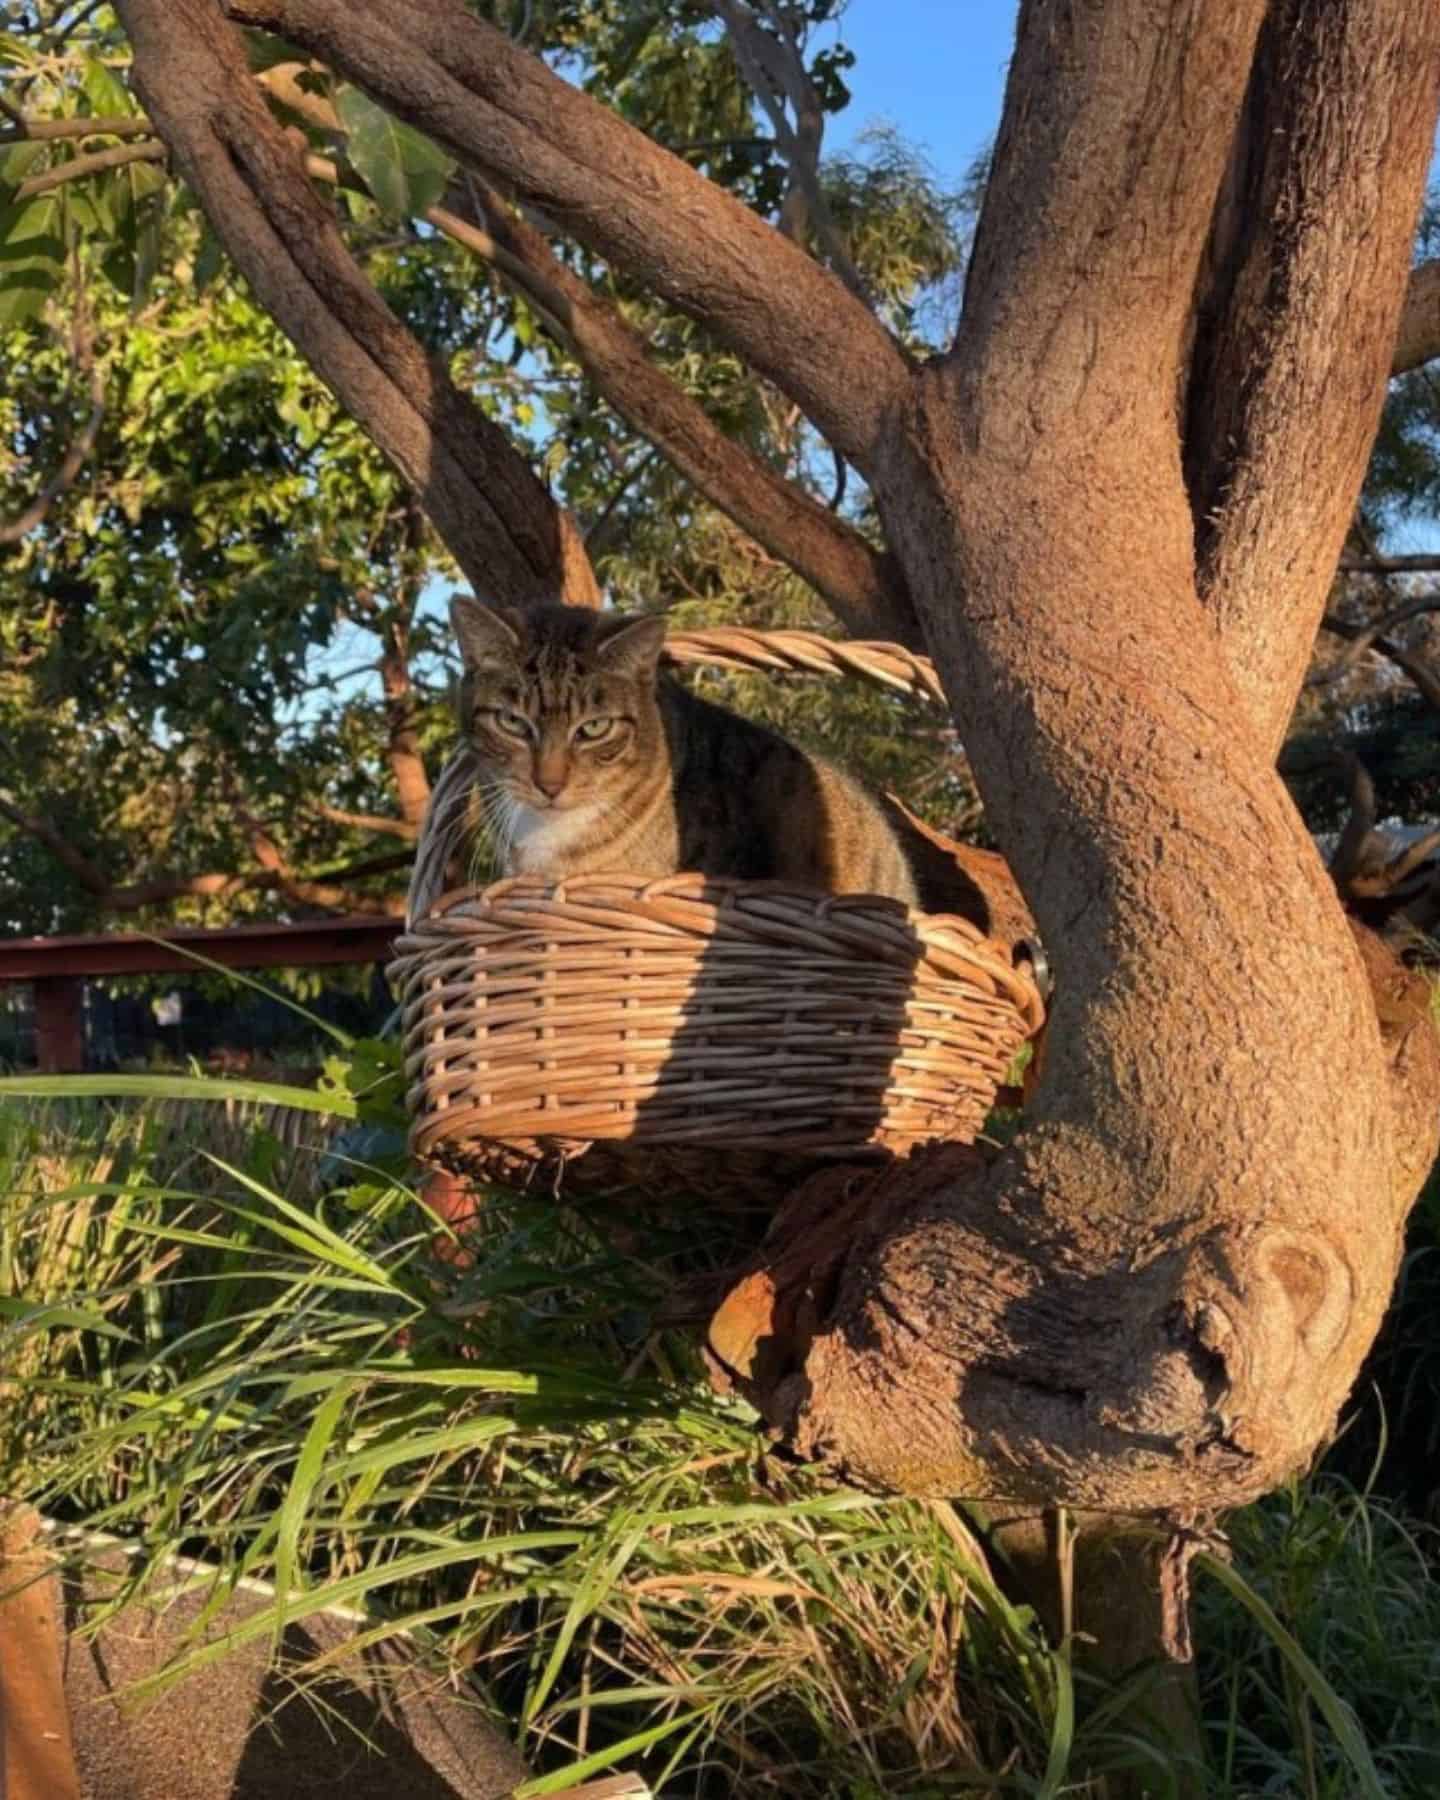 cat sitting in a basket on a tree